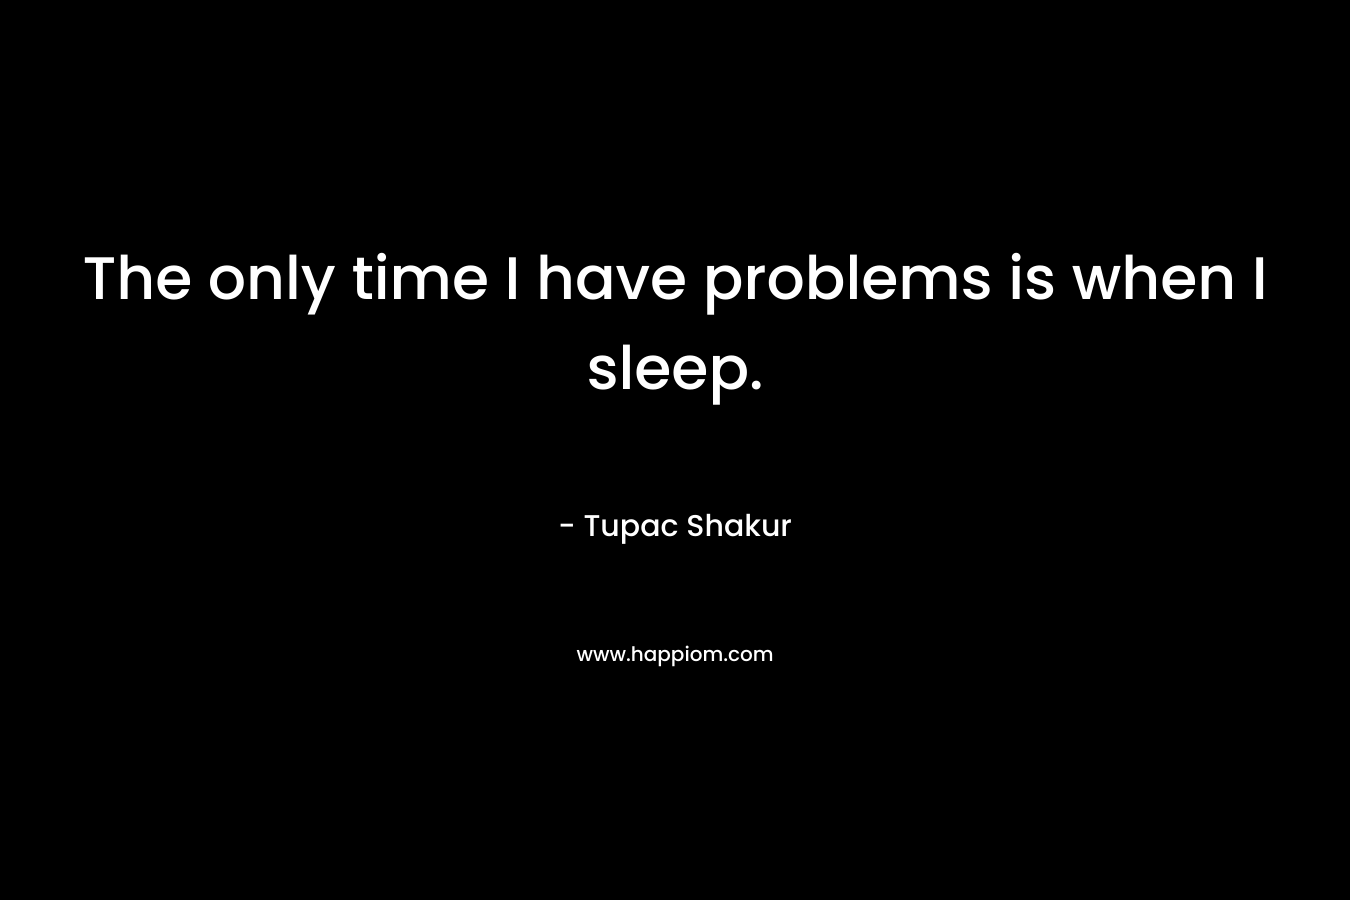 The only time I have problems is when I sleep. – Tupac Shakur